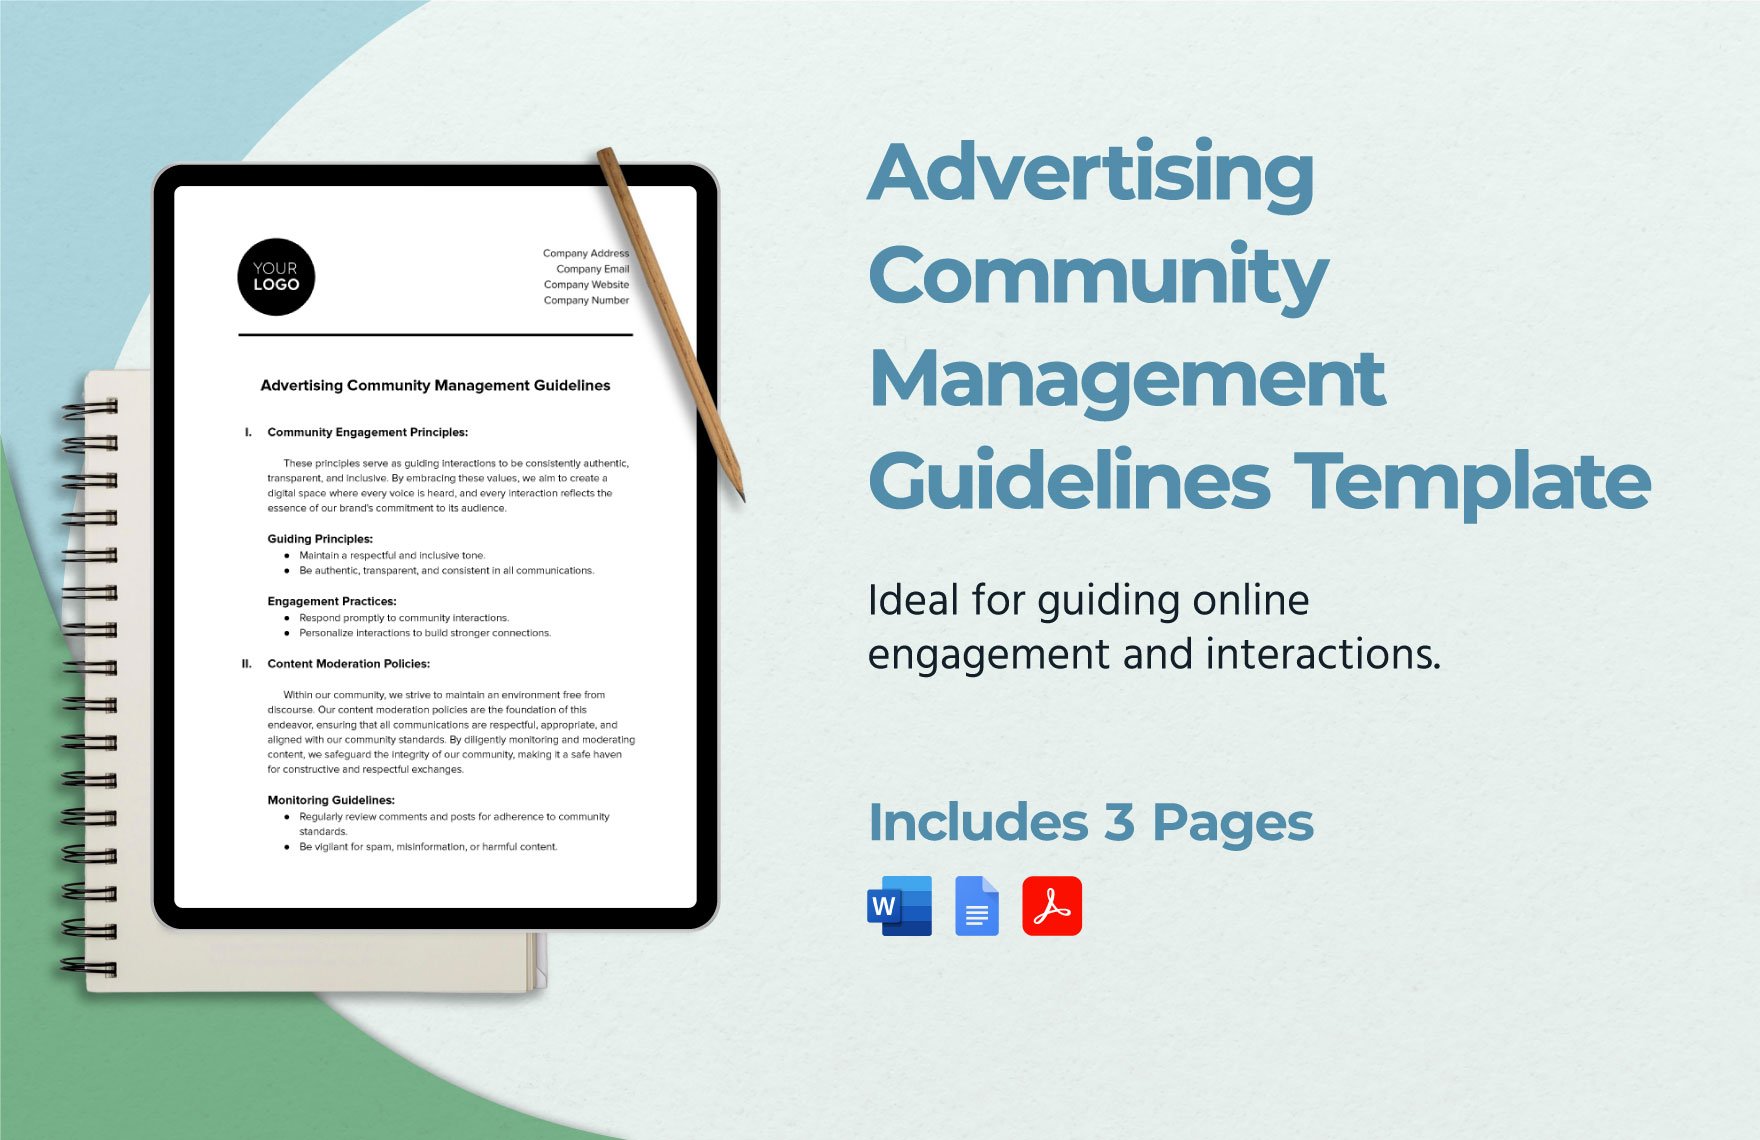 Advertising Community Management Guidelines Template in Word, Google Docs, PDF